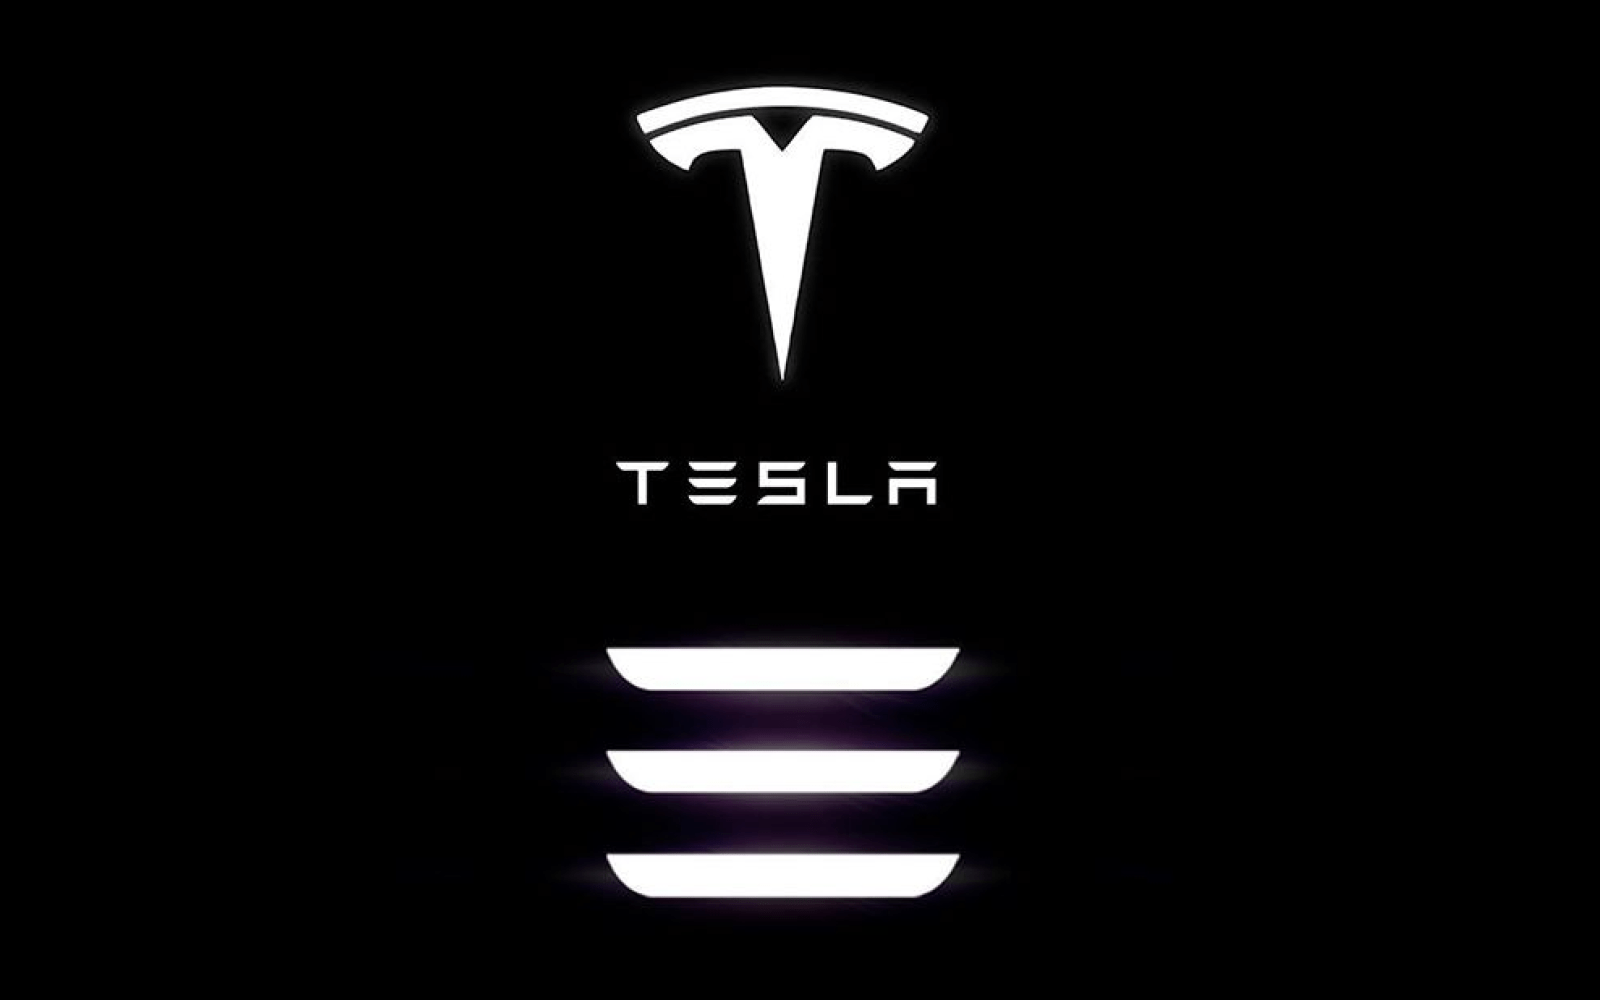 Three White Lines Logo - Tesla officially applies for Model 3 trademark: three equal length